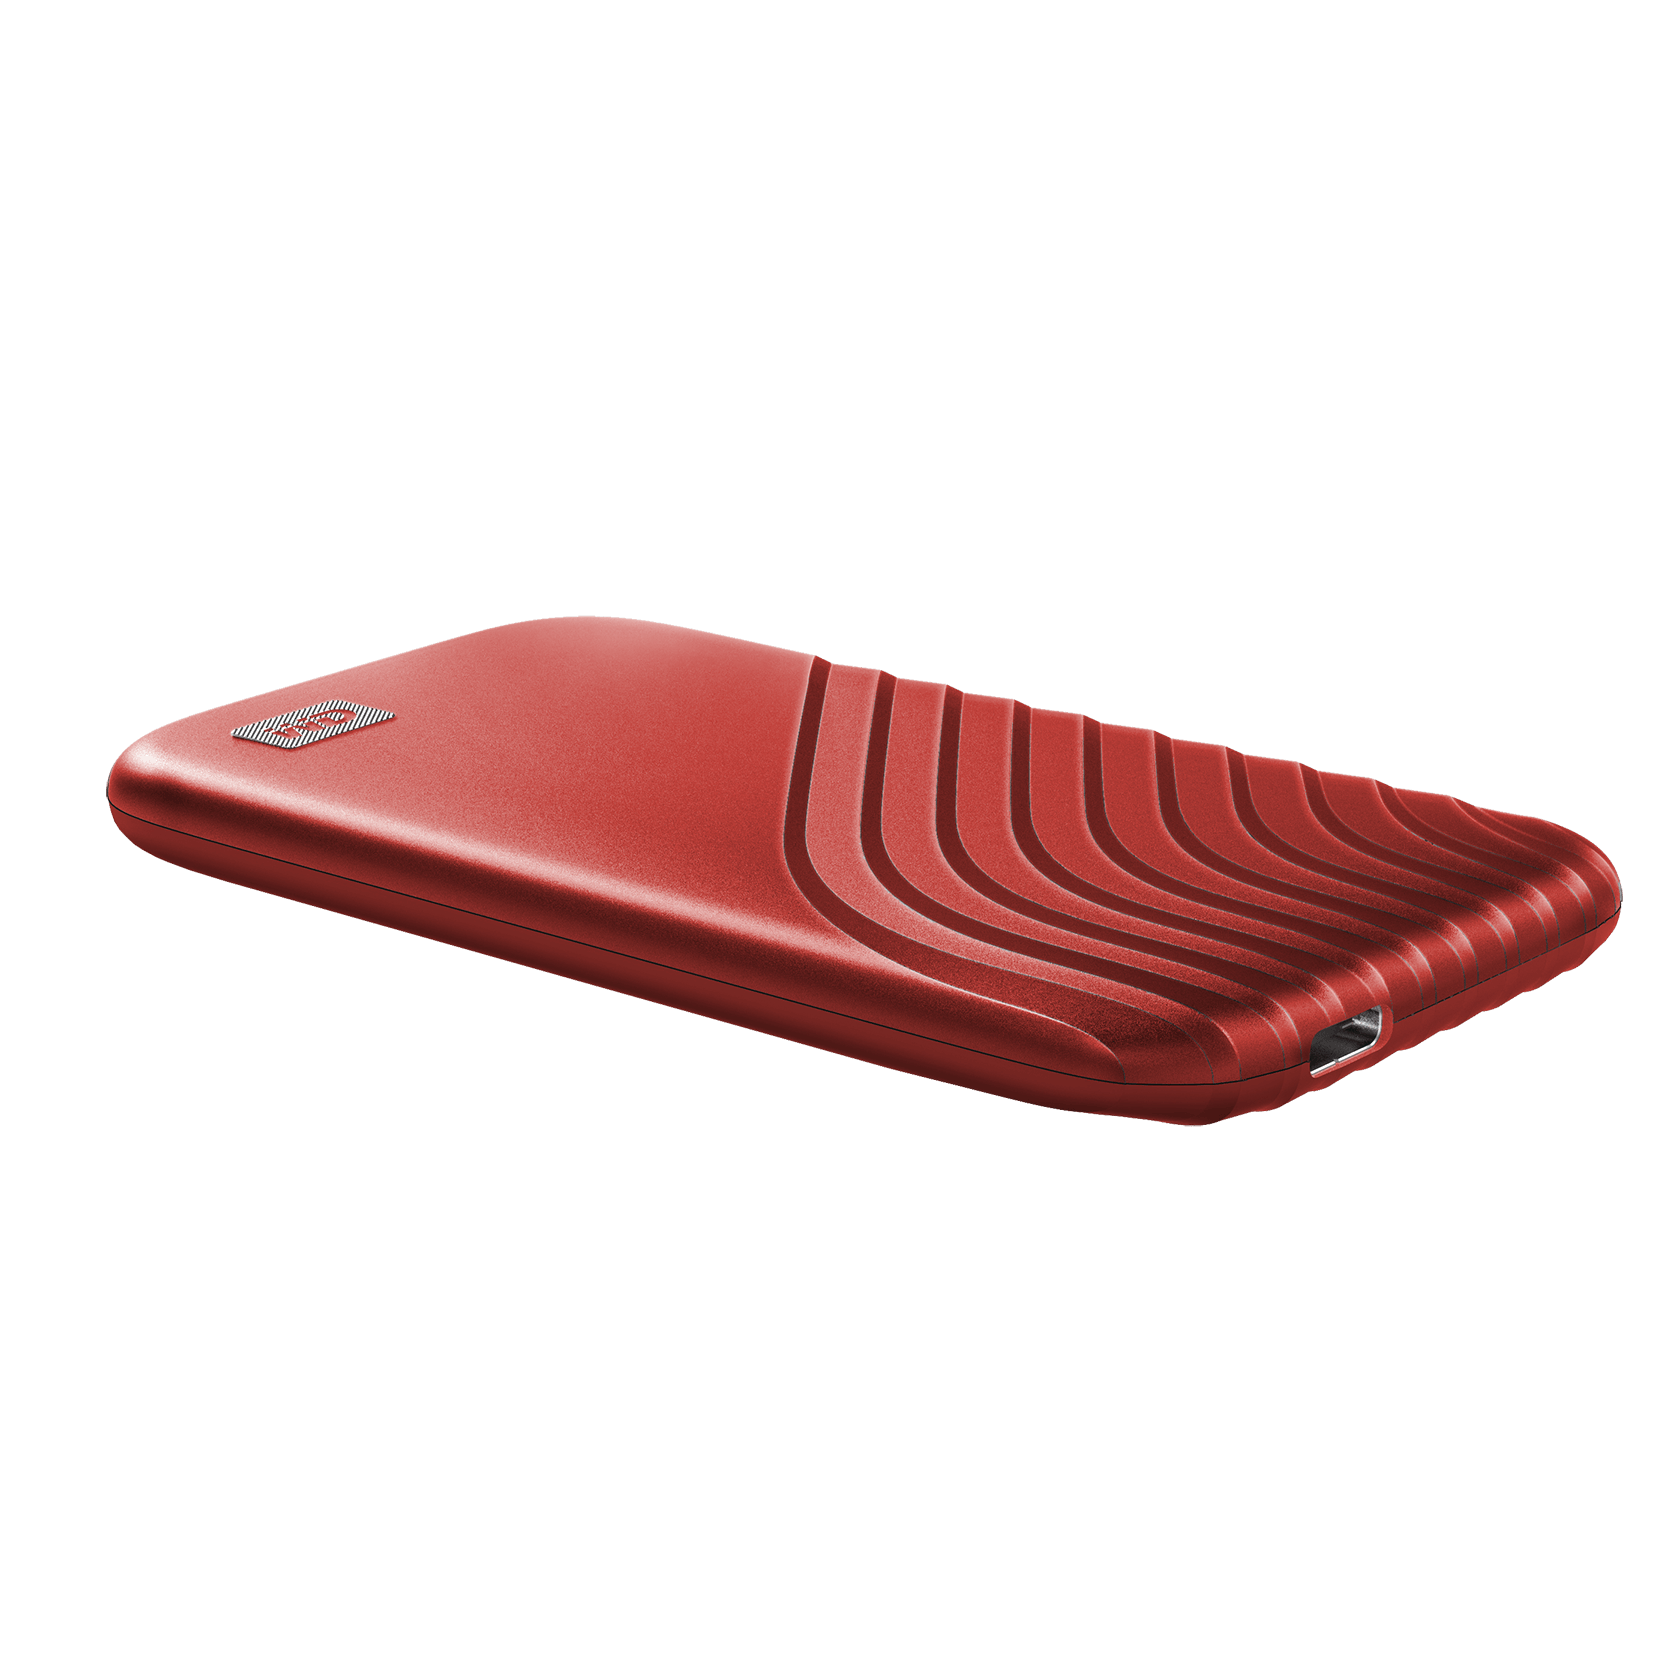 WD 1TB My Passport SSD, Portable External Solid State Drive, Red - WDBAGF0010BRD-WESN - image 5 of 8